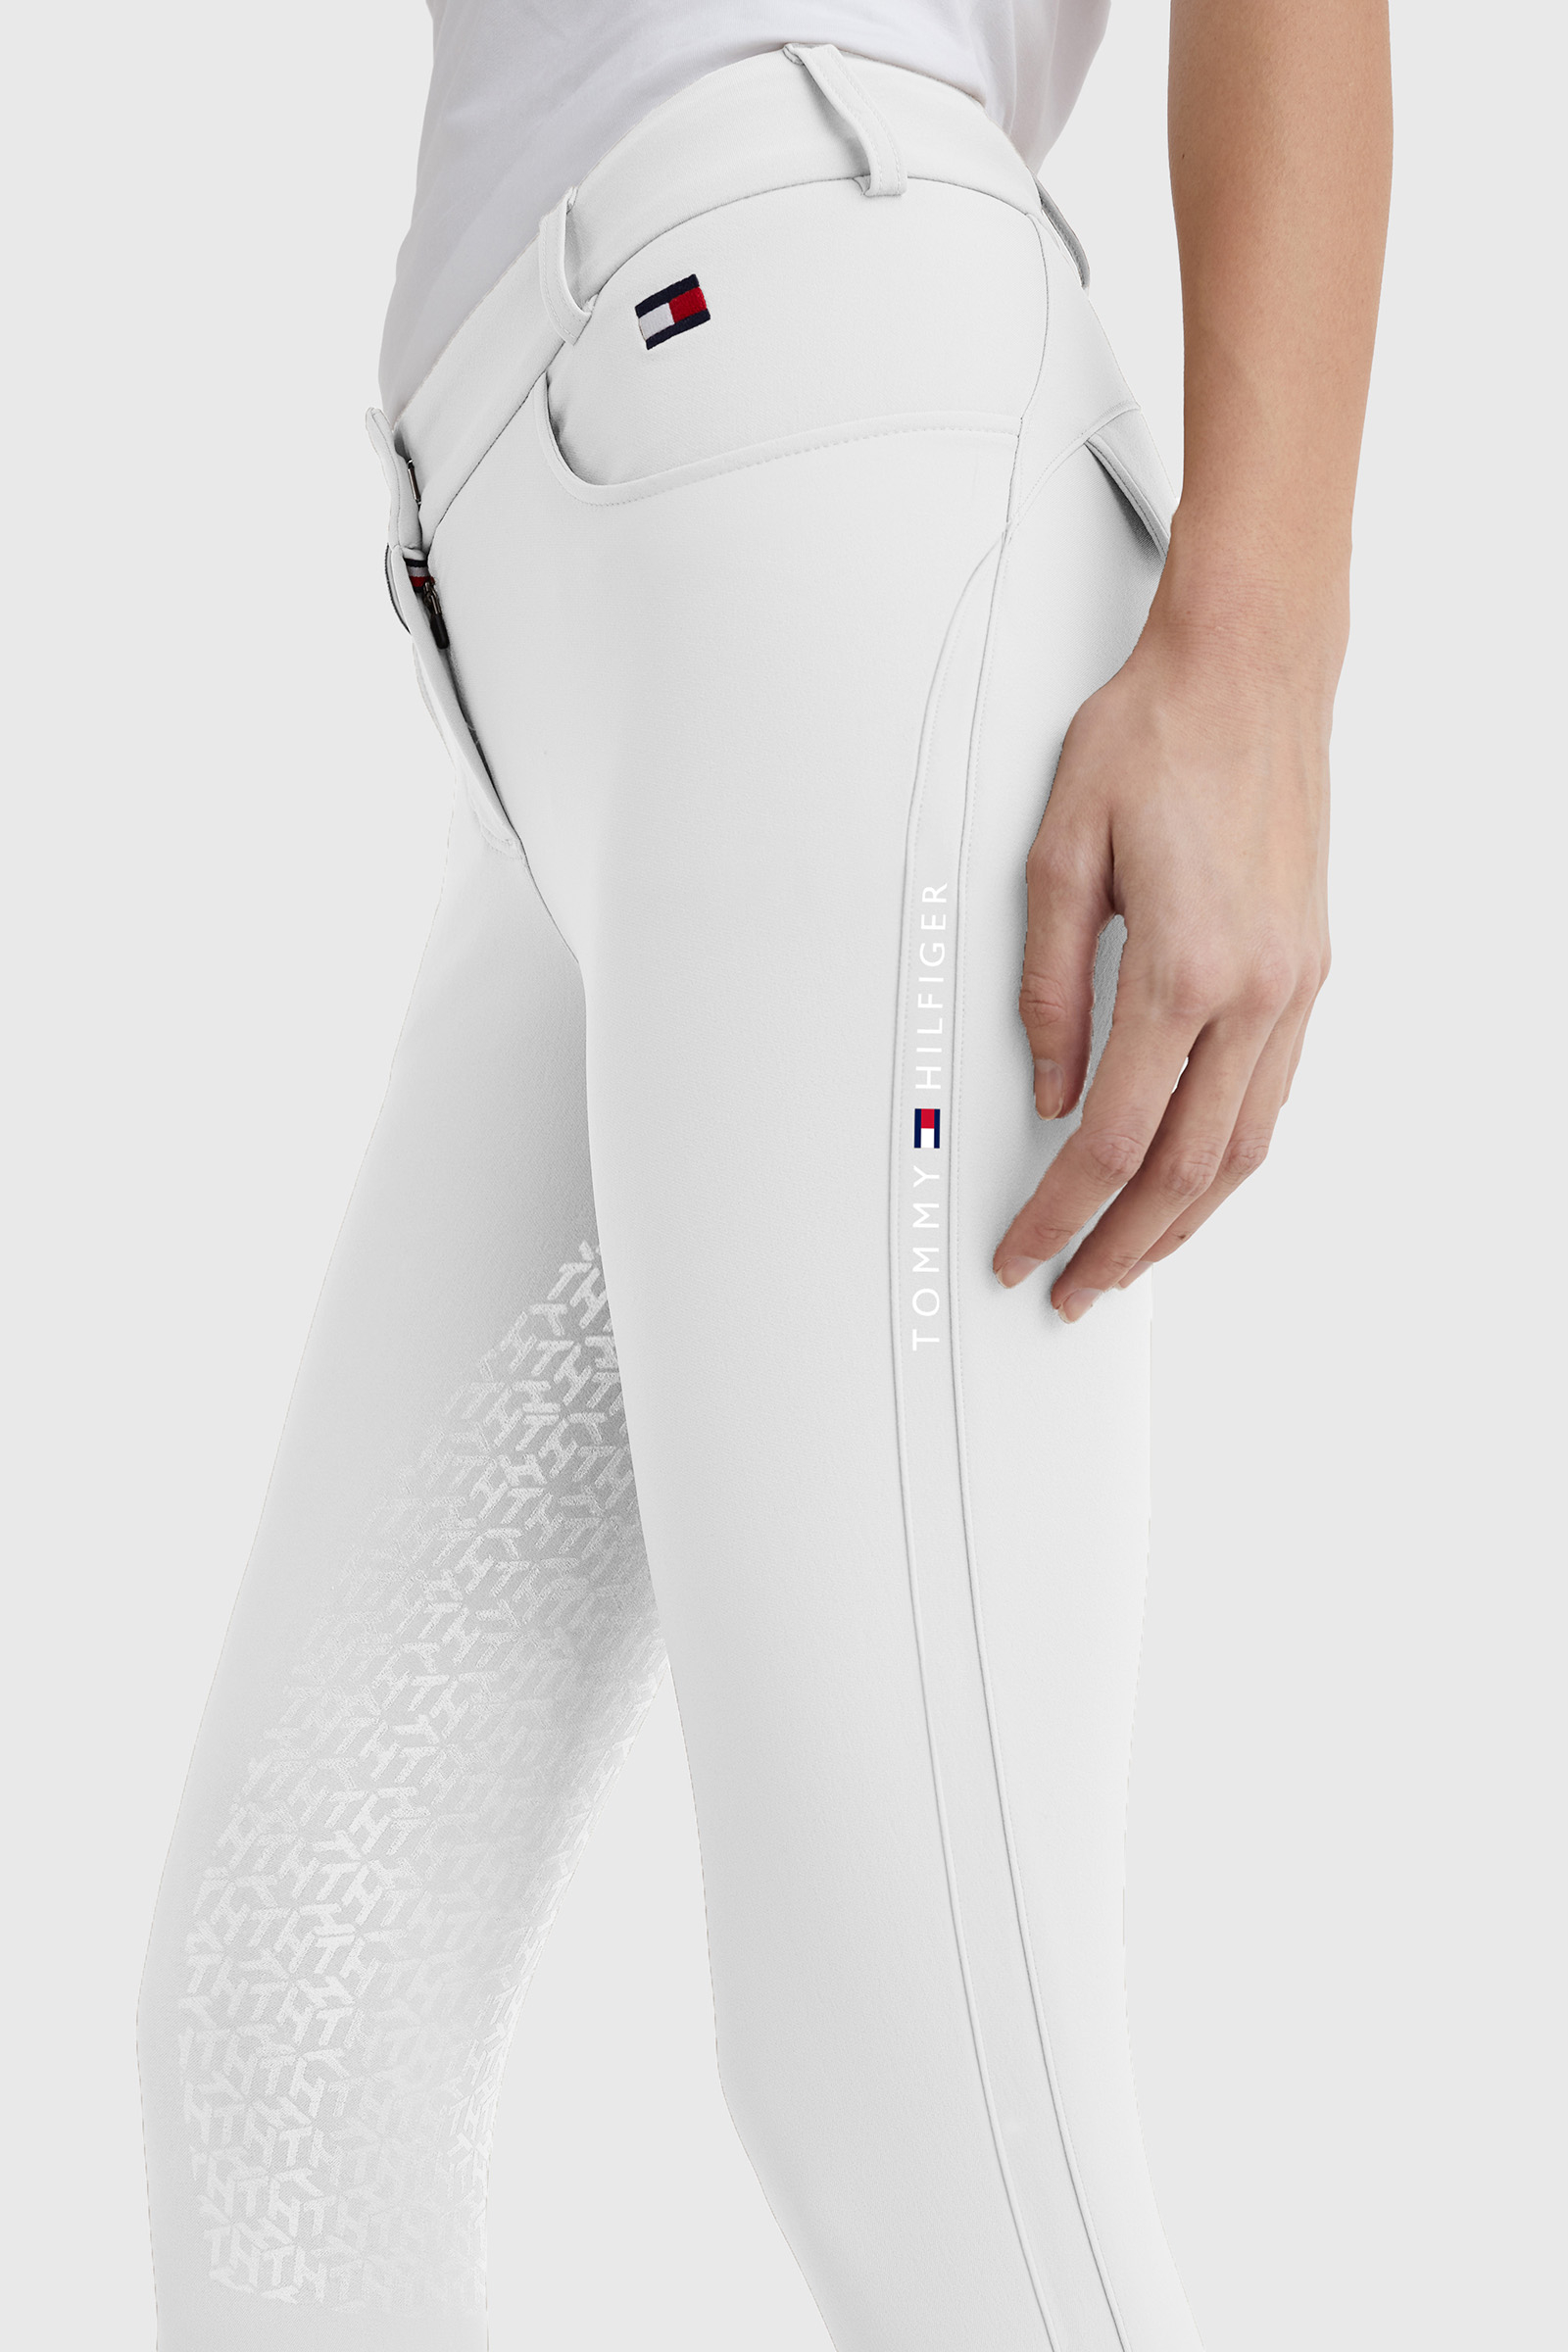 Buy Tommy Hilfiger Equestrian Classic Women's Full Seat Breeches